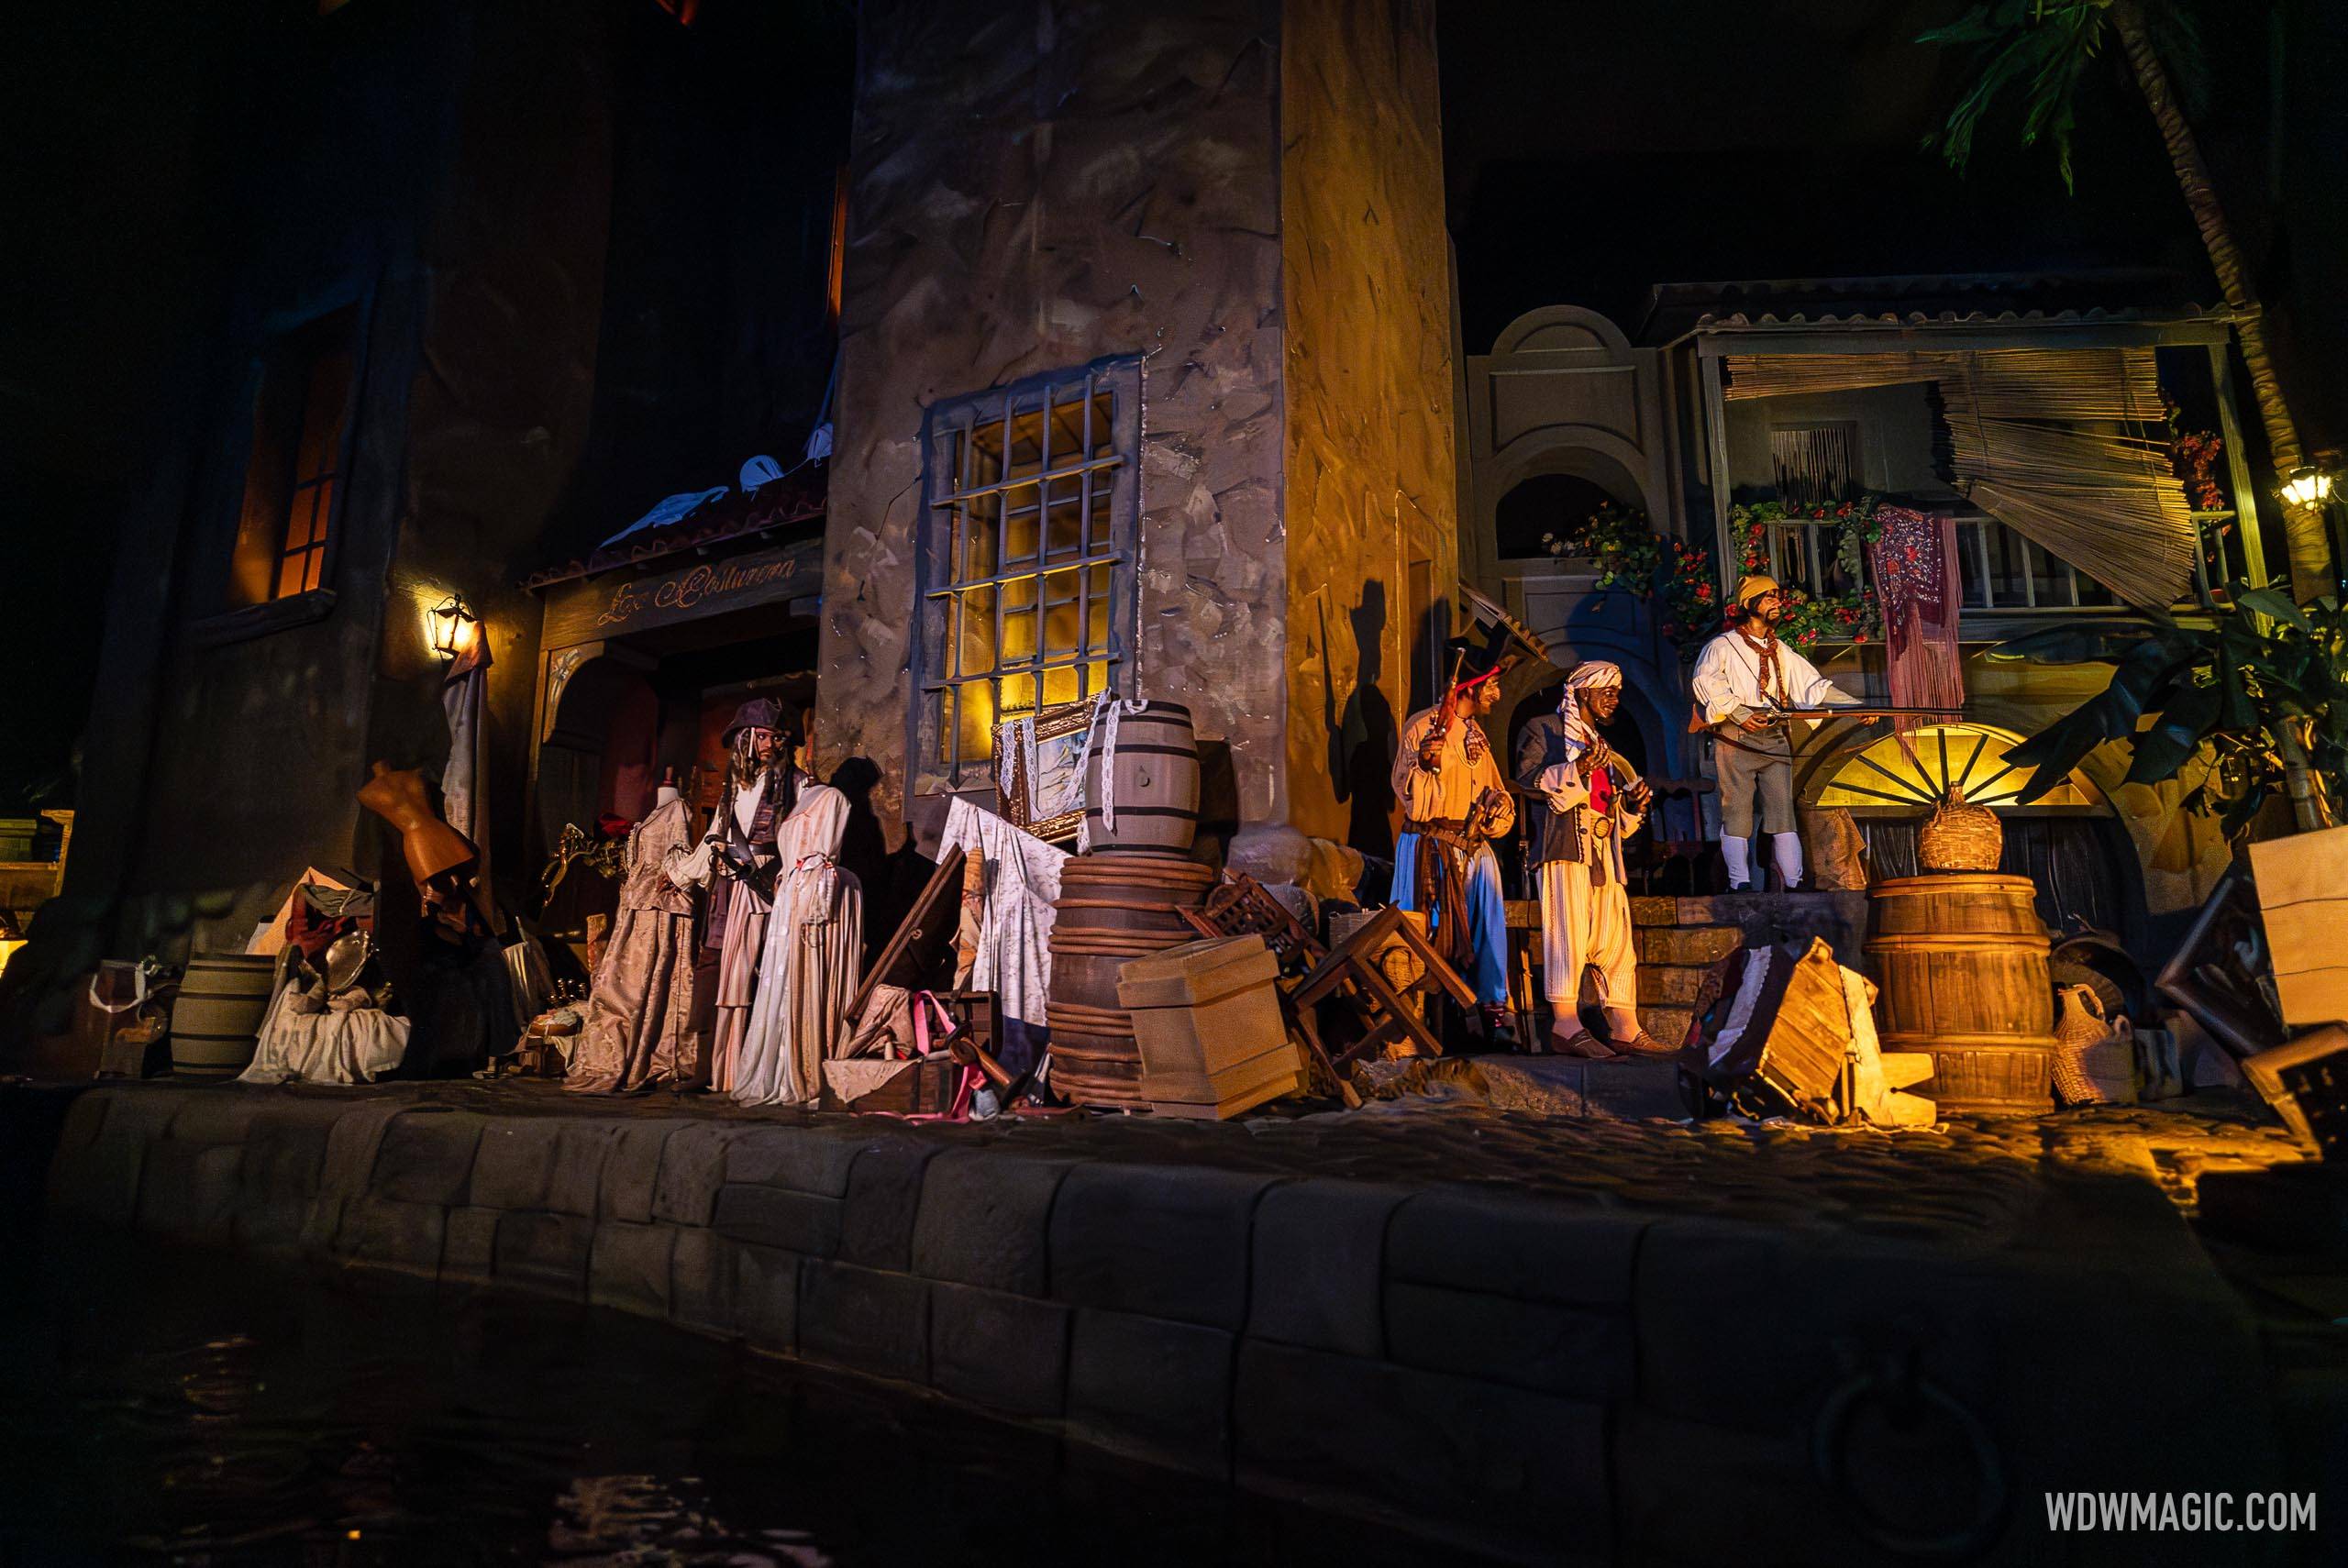 Last few days to meet Angelica from latest Pirates of the Caribbean movie